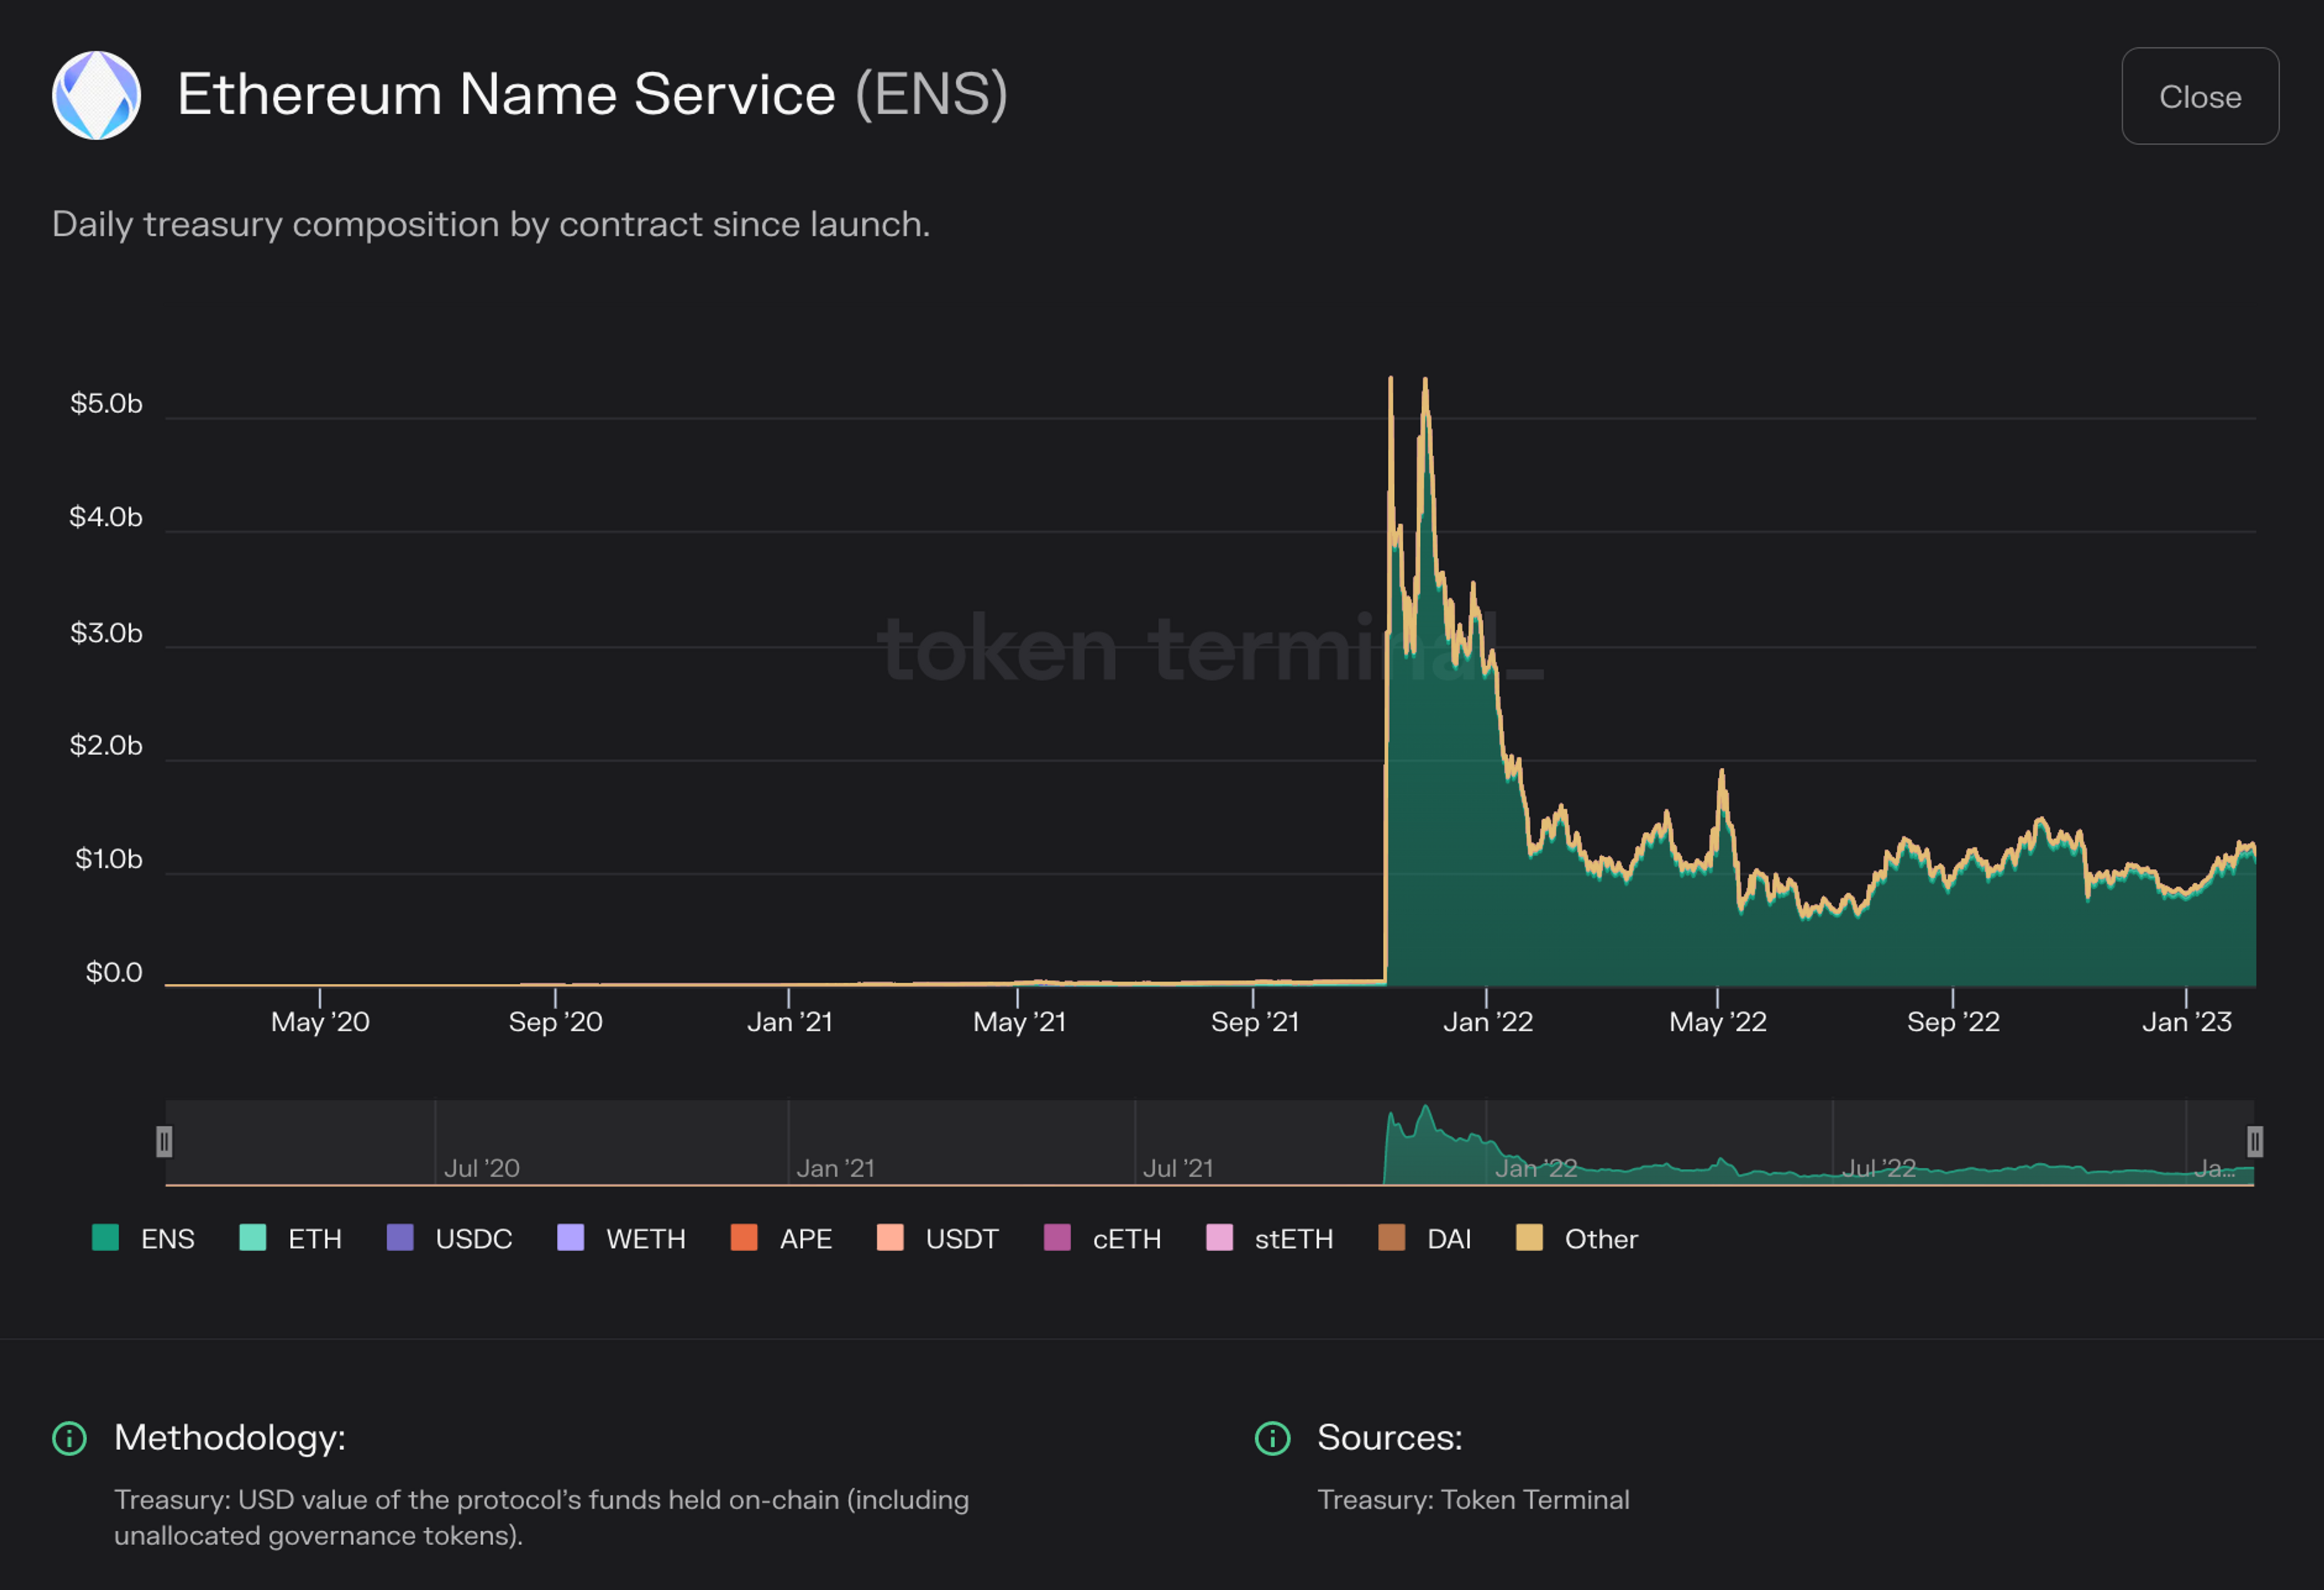 Chart of Ethereum Name Service daily treasury composition by contract